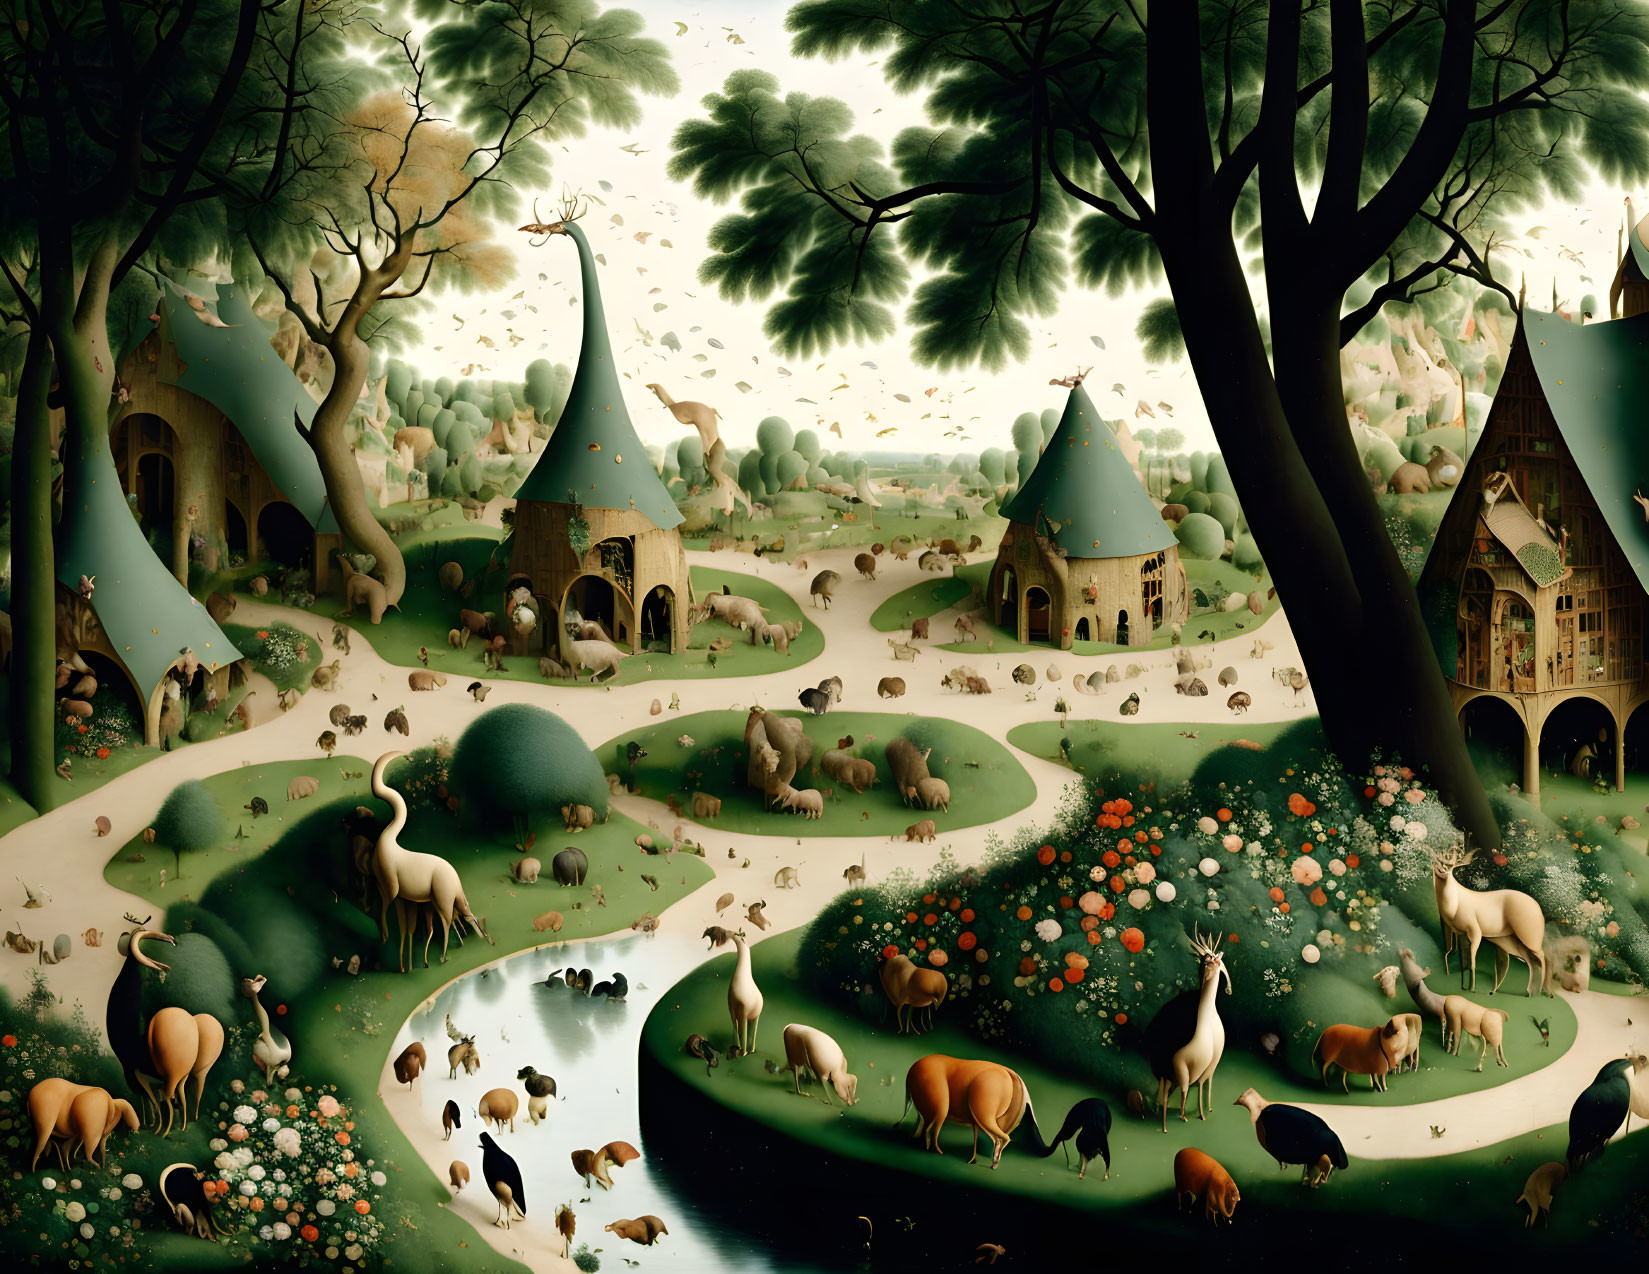 Whimsical landscape with rolling hills, diverse animals, and oversized tree canopy